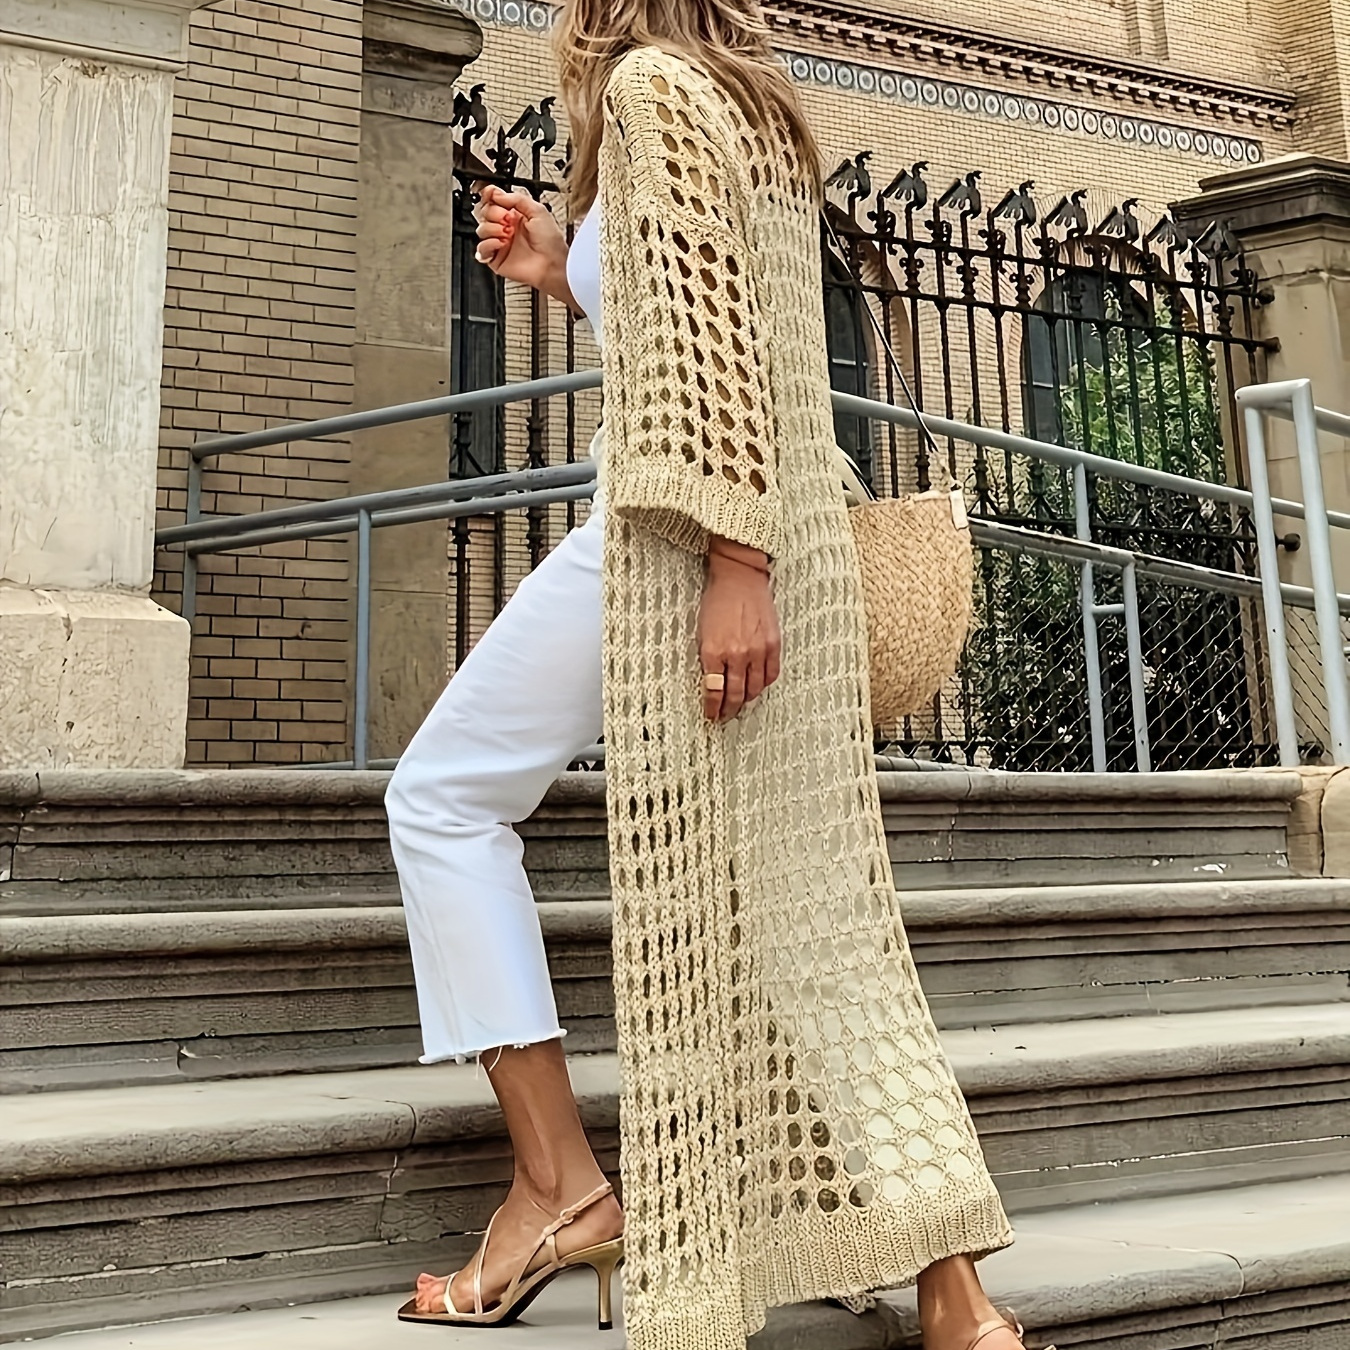 

Bohemian Style Women's Long Crochet Cardigan - Chic Loose Fit Open Front Shawl With Hollow-out Design, Versatile Summer Cover-up